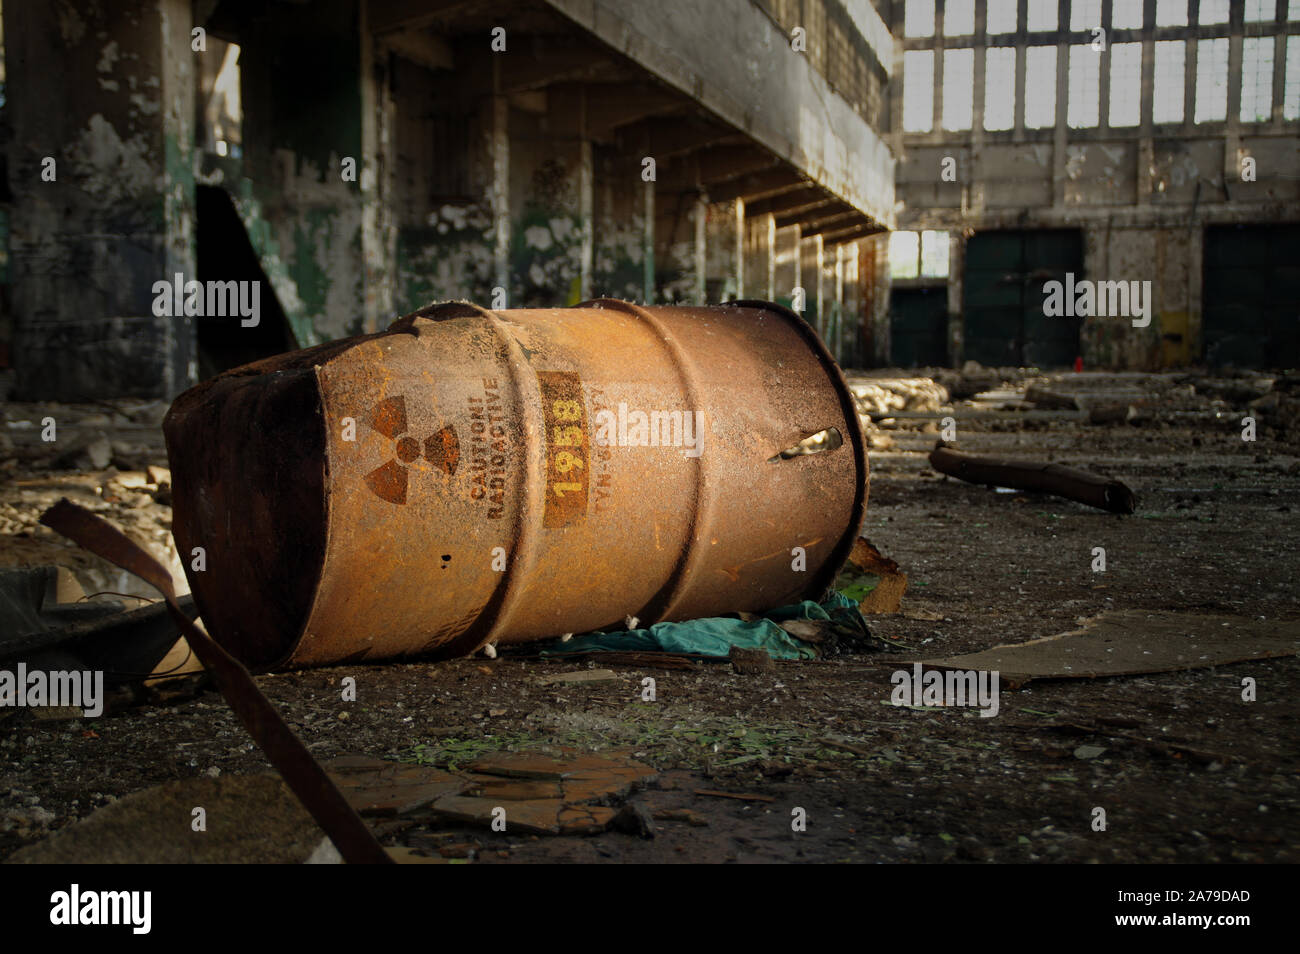 Radioactive warning on old rusty barrel in destroyed and forgotten building. Radiation symbol with alert on waste container after nuclear disaster. 3D Stock Photo